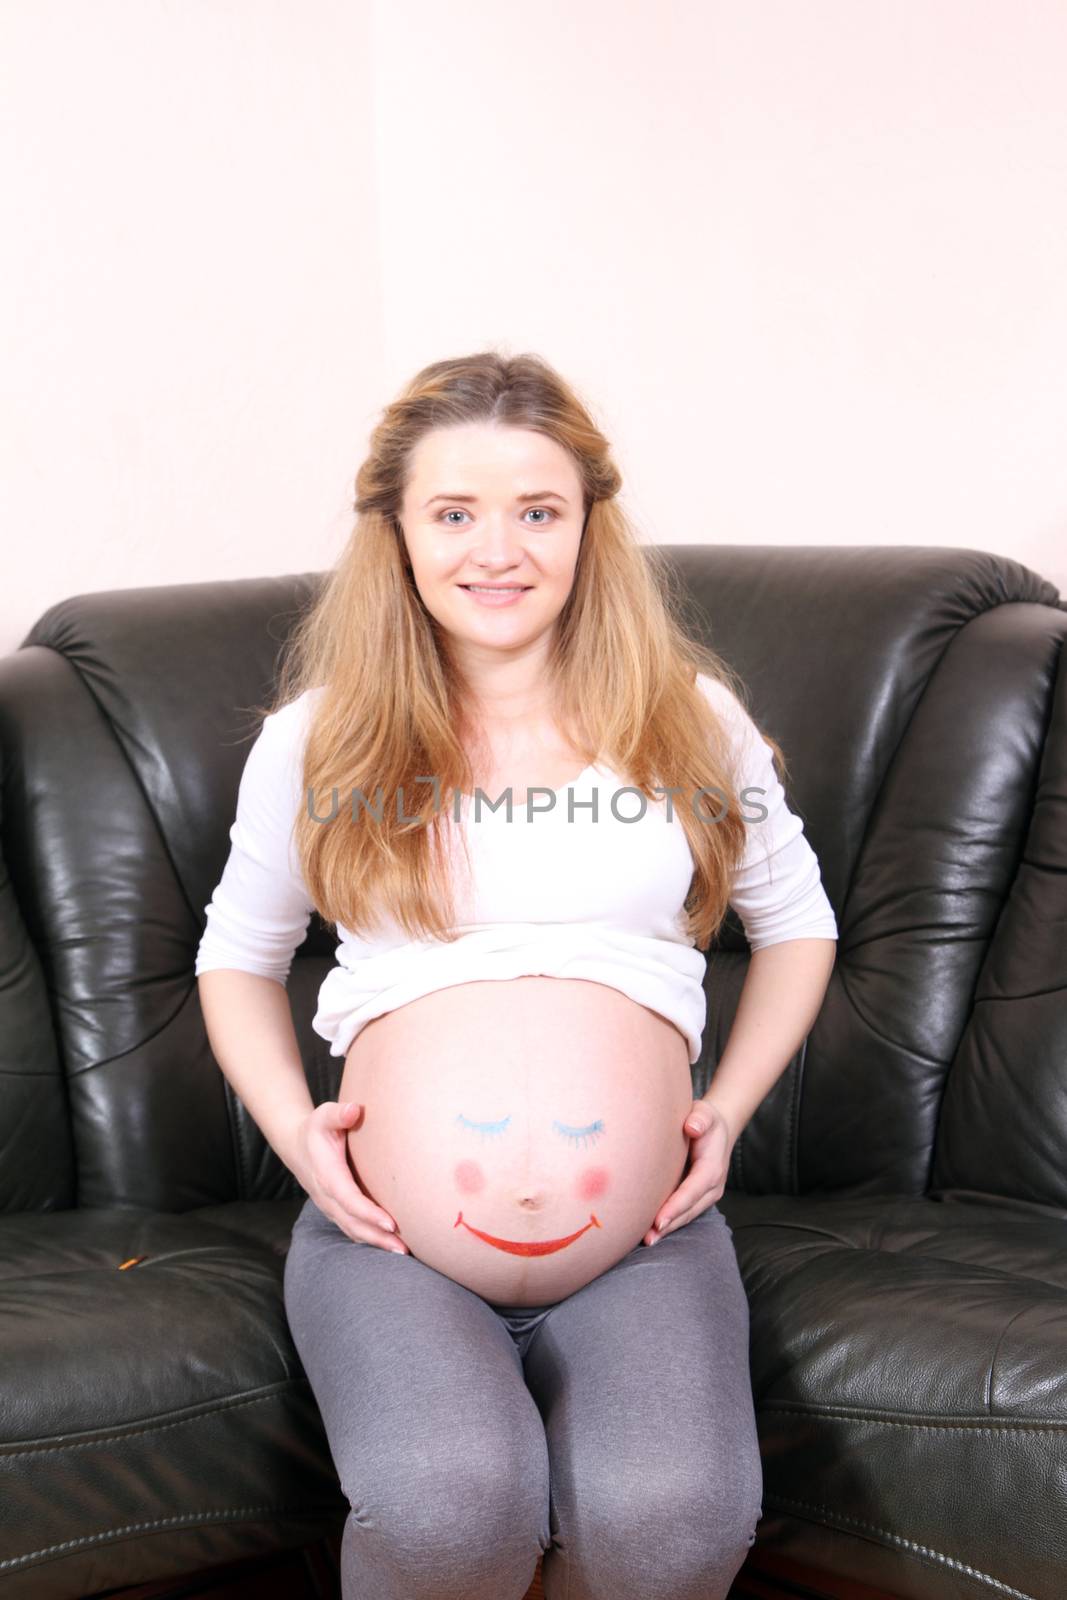 Pregnant woman with a painted face on a stomach sleeper by Irina1977